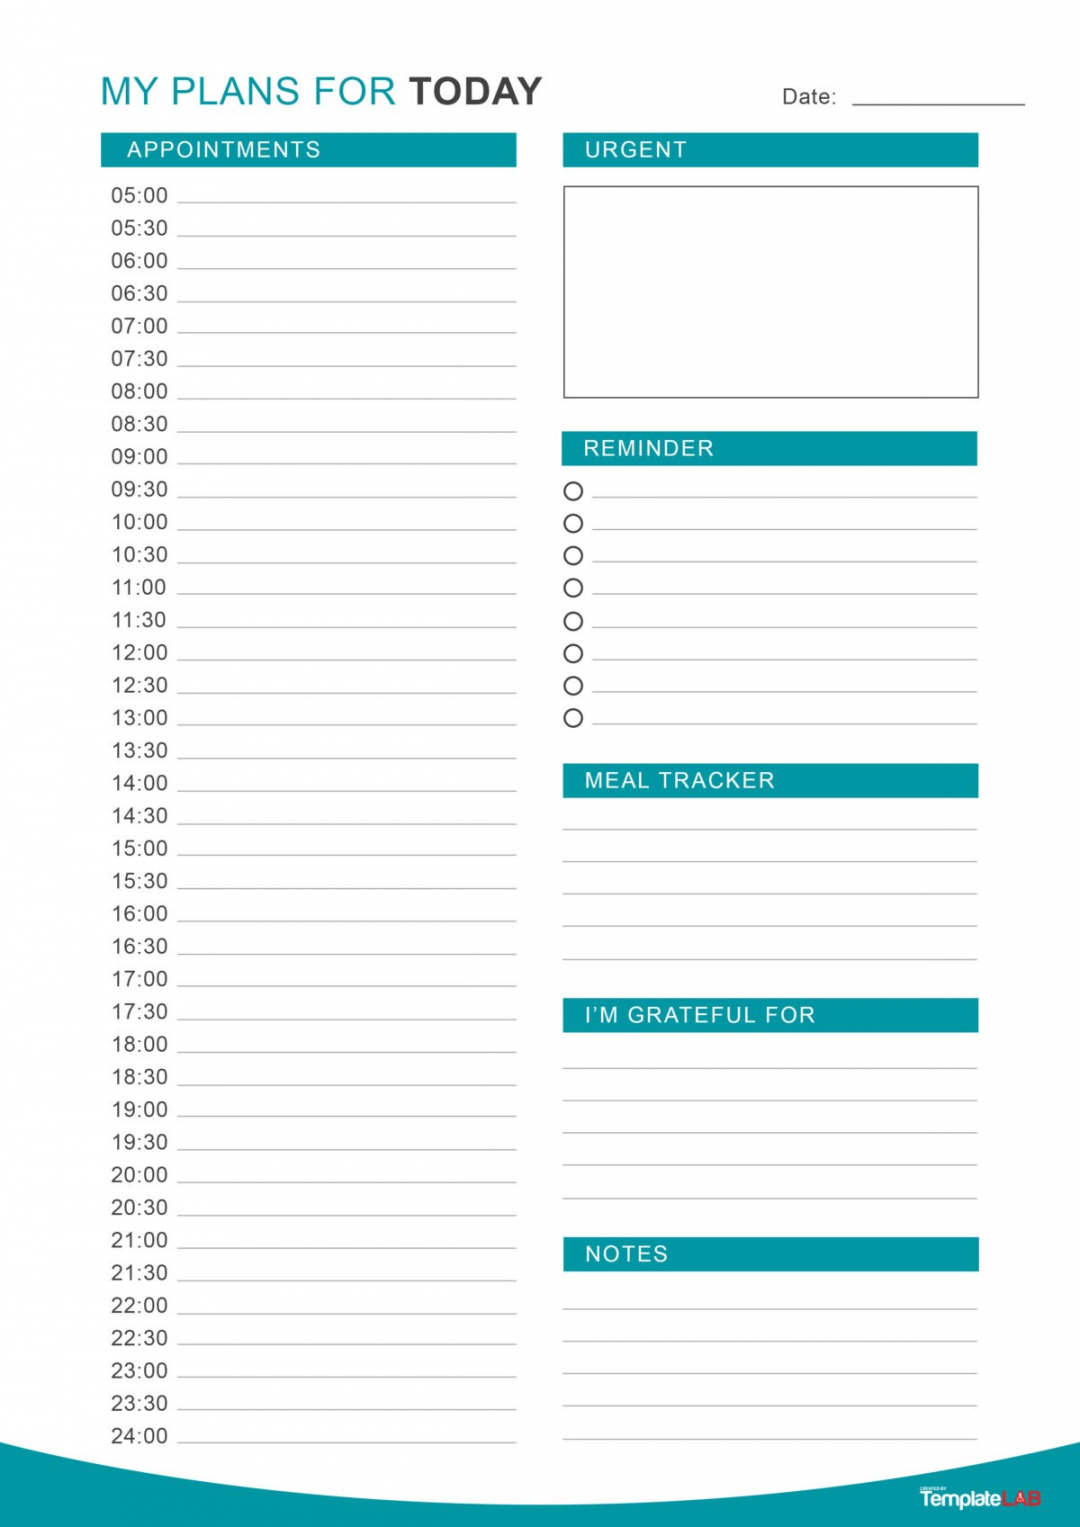 Free Printable Daily Schedule - Printable -  Printable Daily Planner Templates (FREE in Word/Excel/PDF)